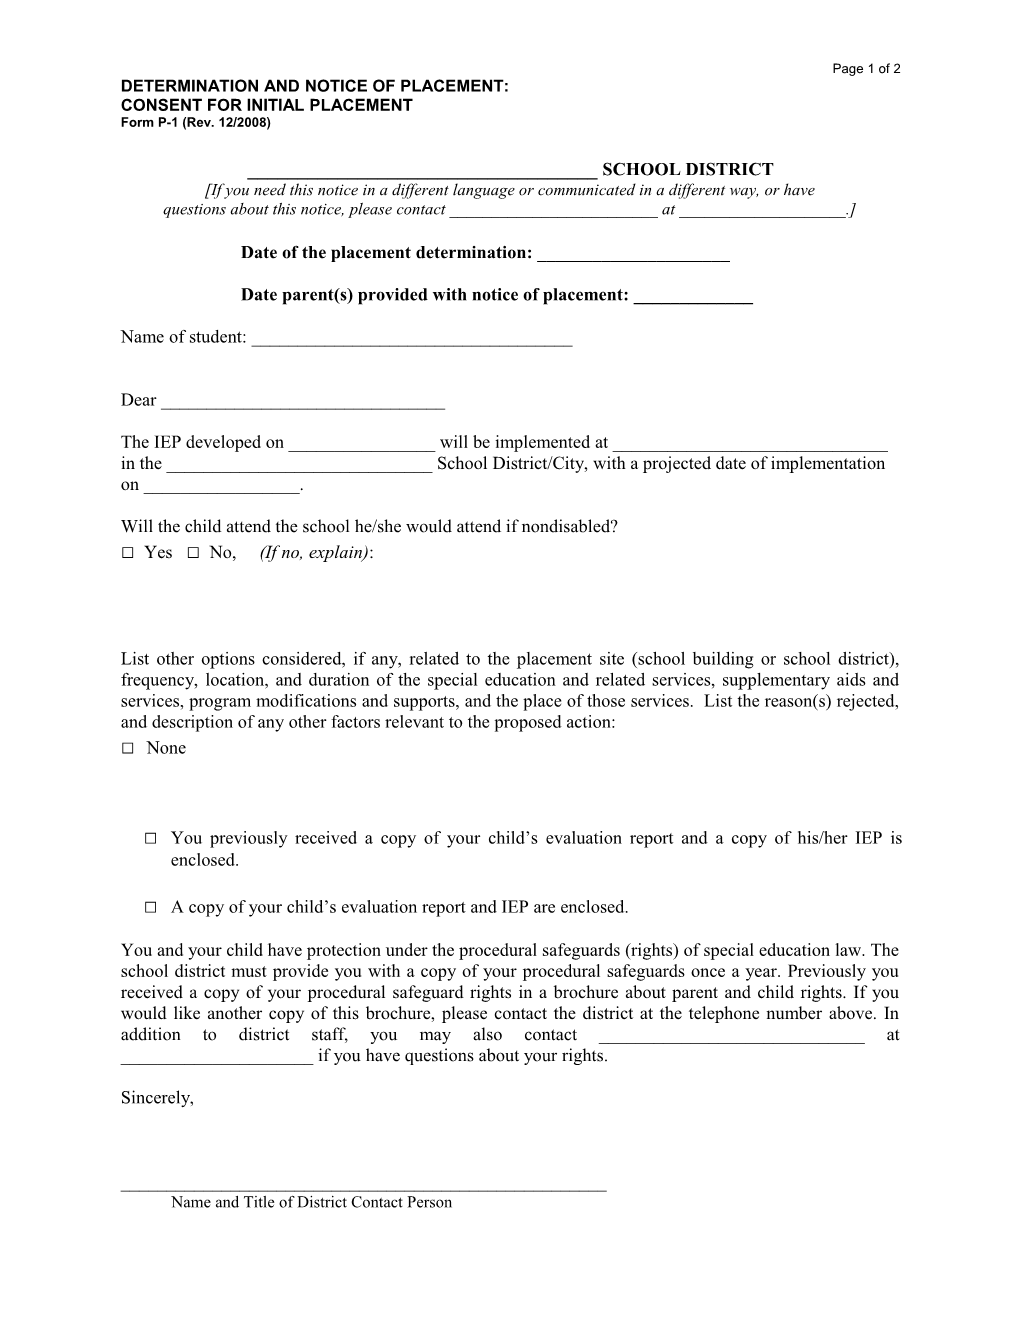 Sample Special Education Forms: P-1